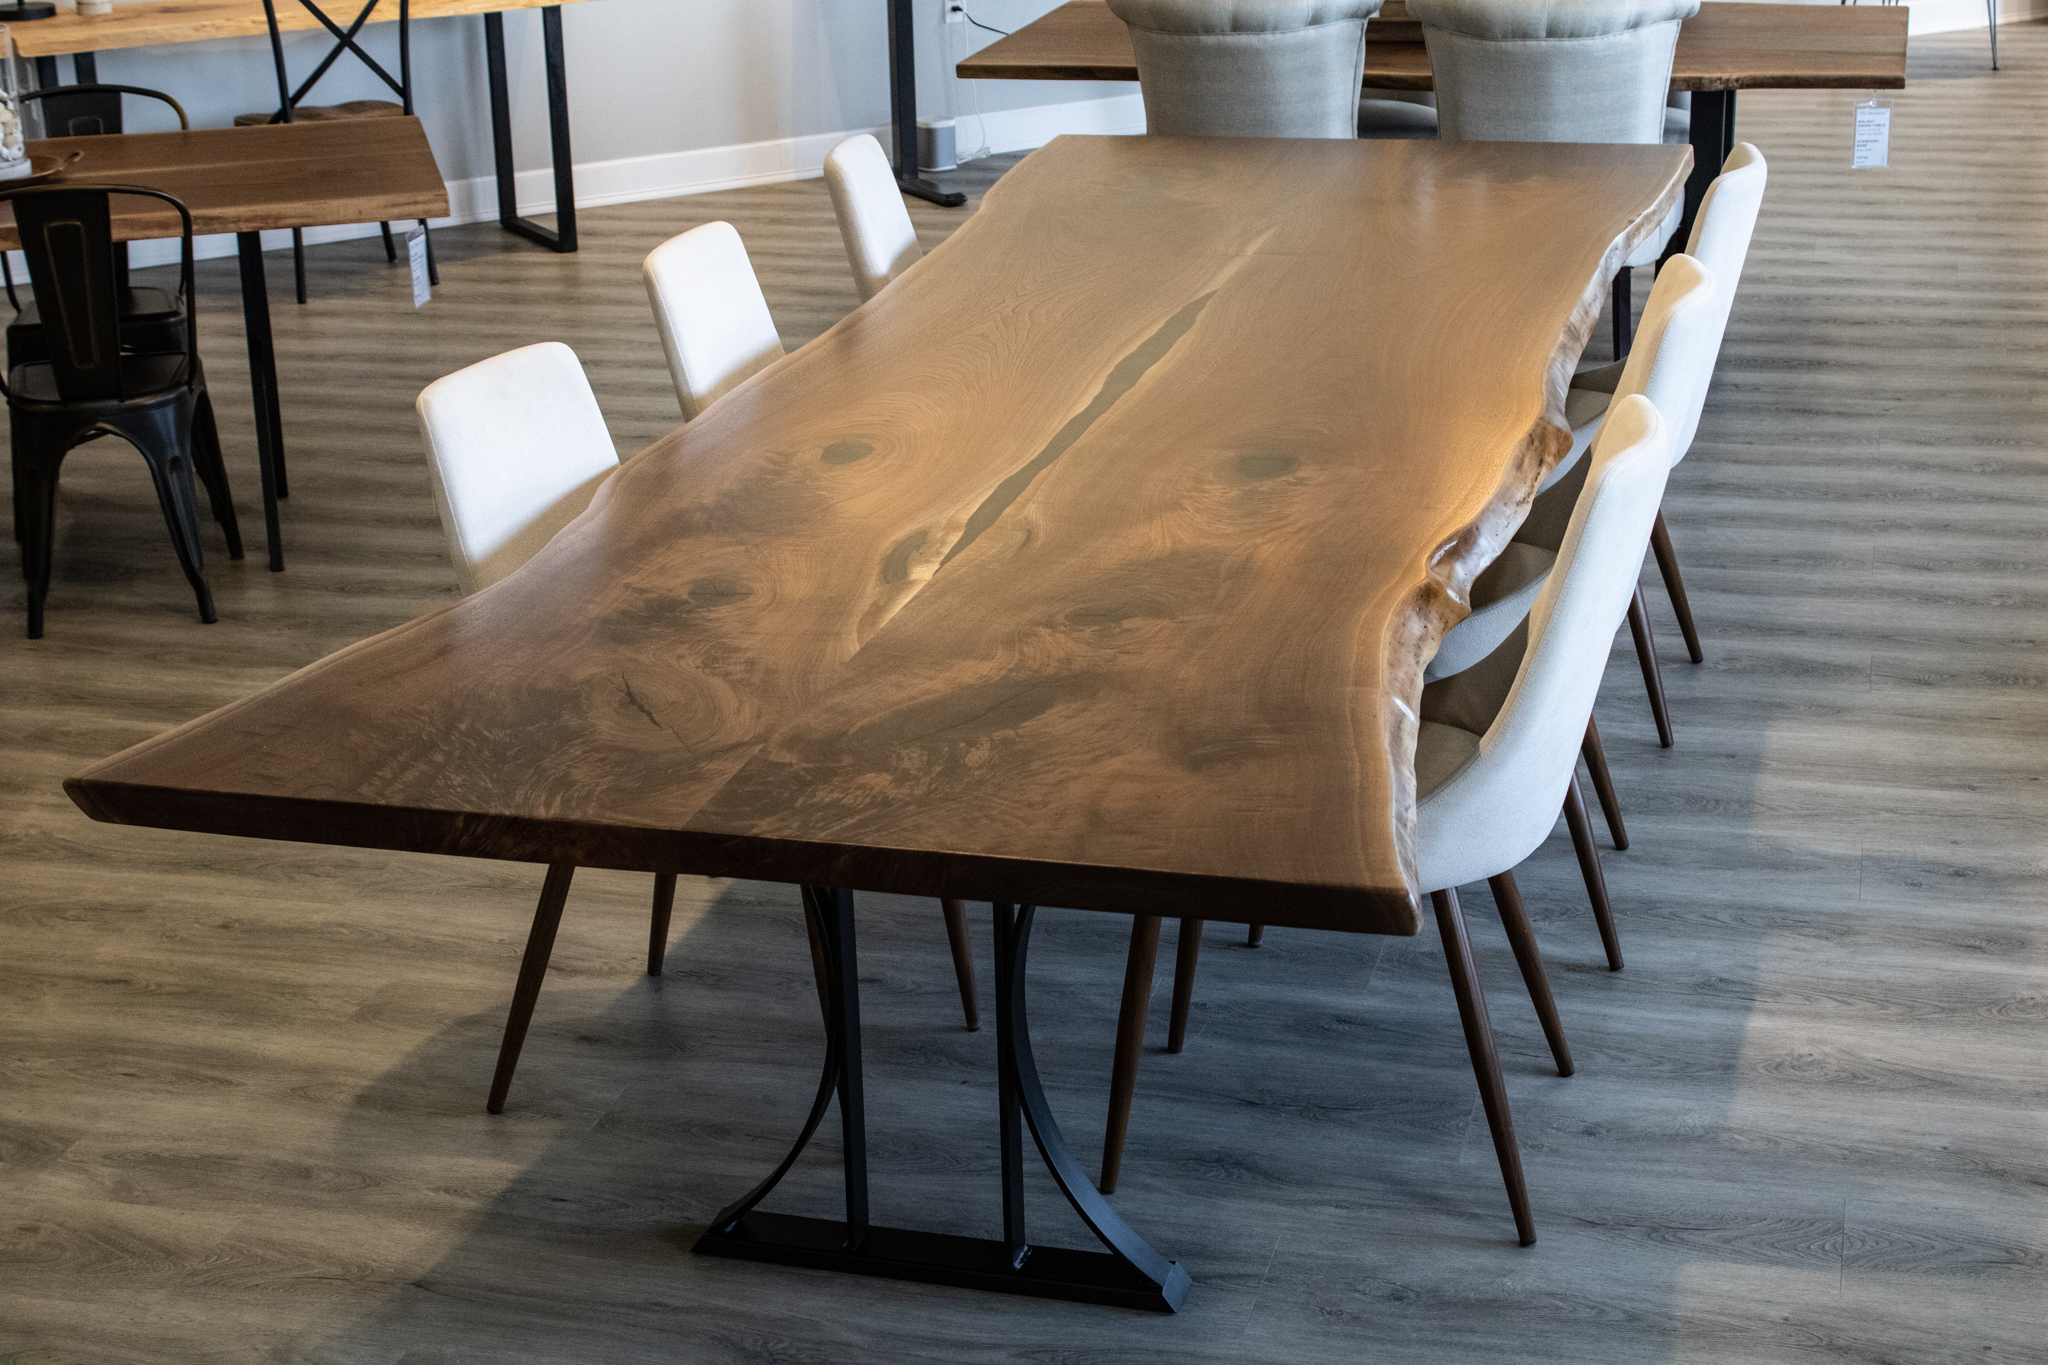 Mammoth Live EdgeWalnut Dining Table - 12' - Pathway Tables